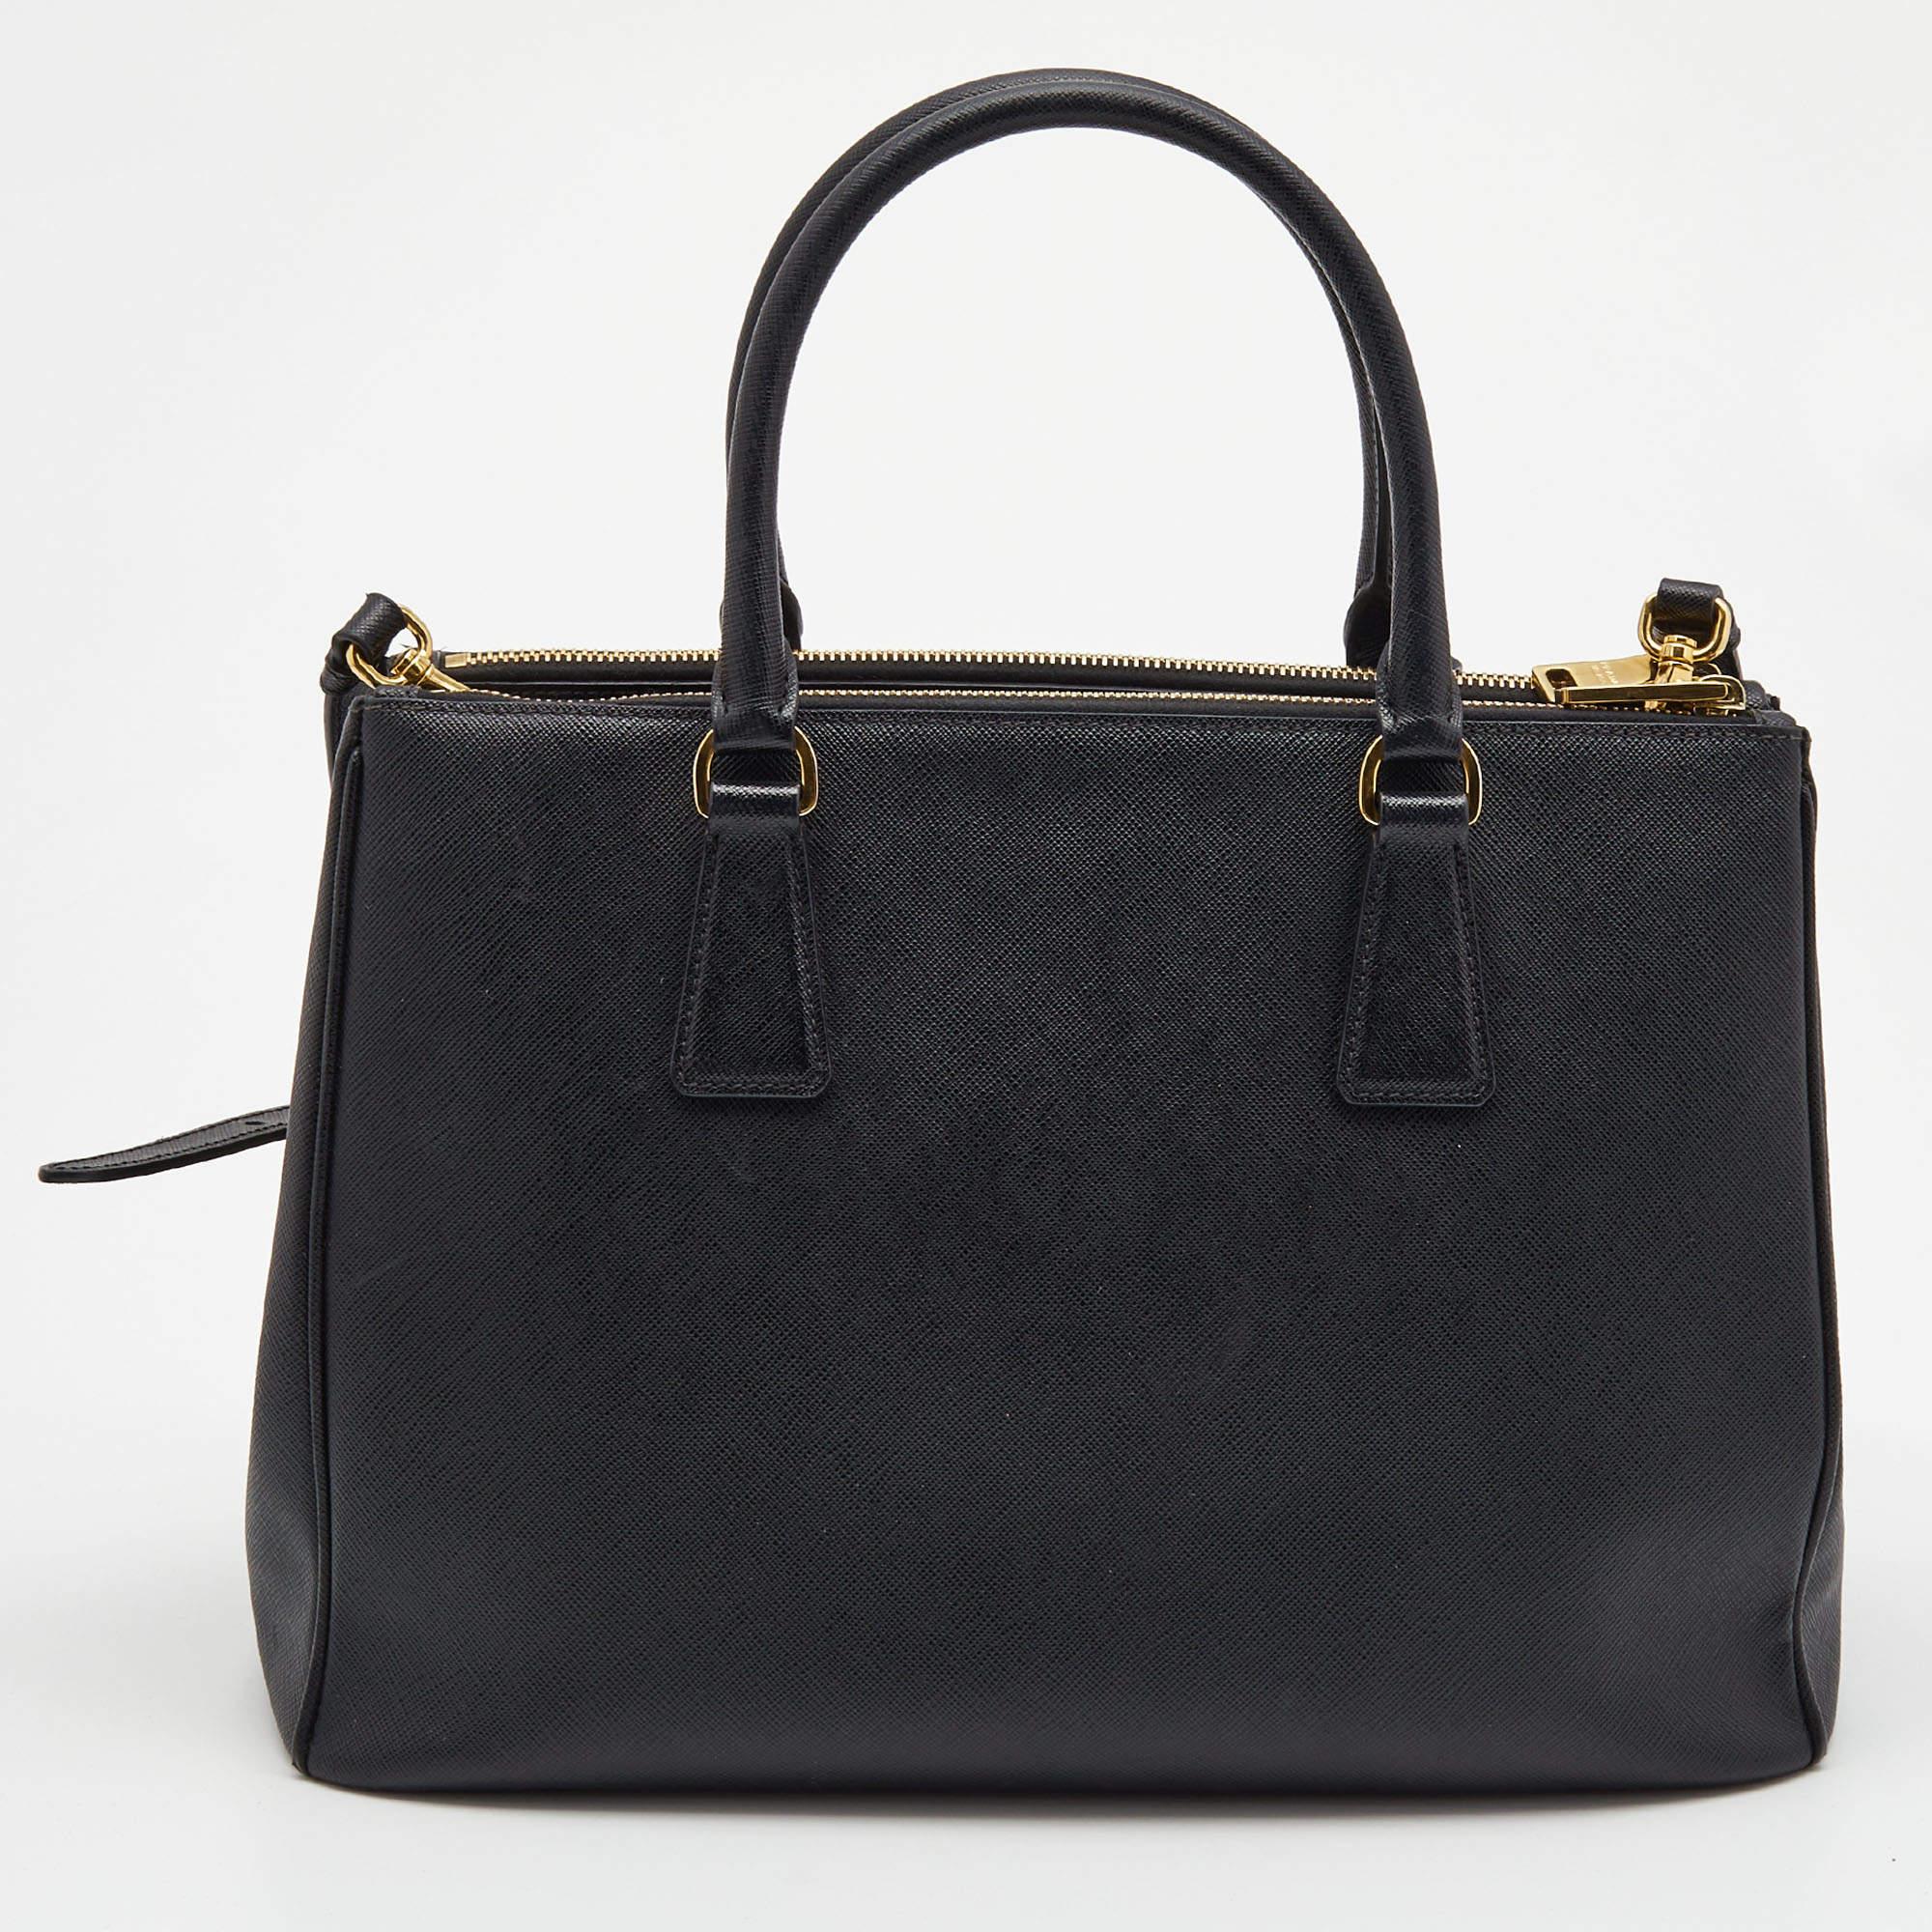 Loved for its classic appeal and functional design, Galleria is one of the most iconic bags from the house of Prada. This beauty in black is crafted from Saffiano leather and is equipped with two top handles, the brand logo at the front, and a